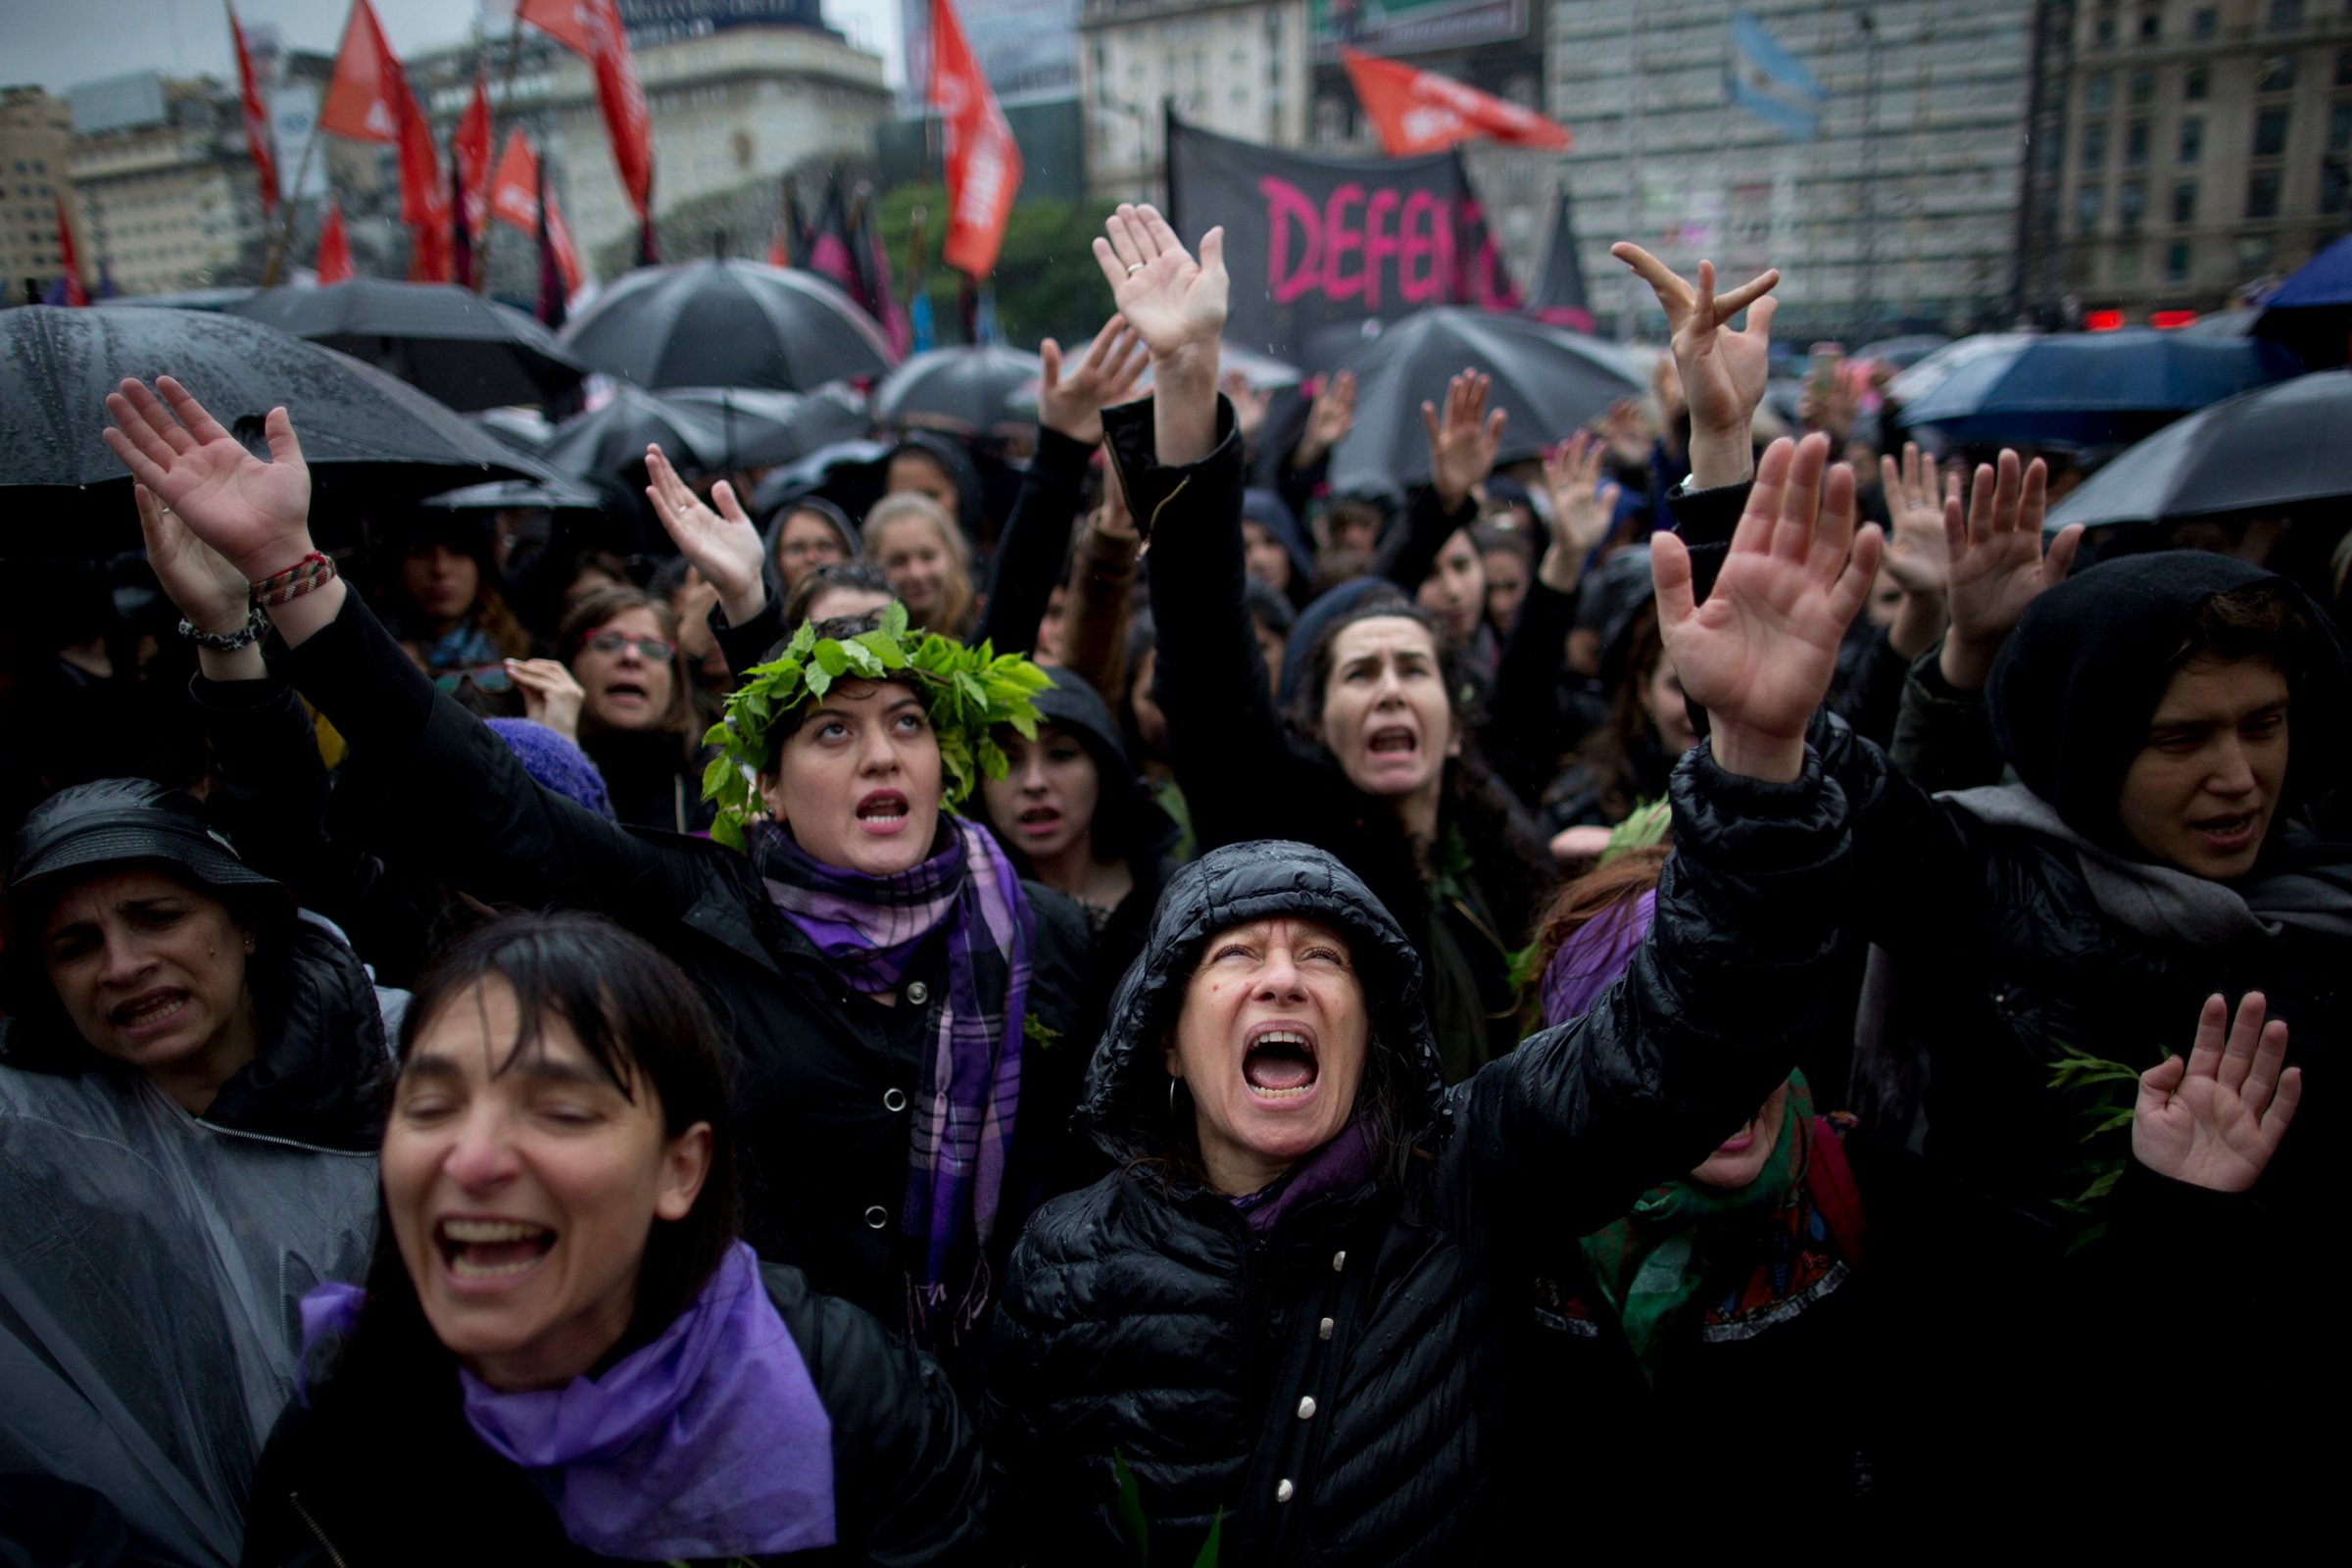 Women shout during a demonstrating against gender violence in Buenos Aires, Argentina, on Oct. 19, 2016.